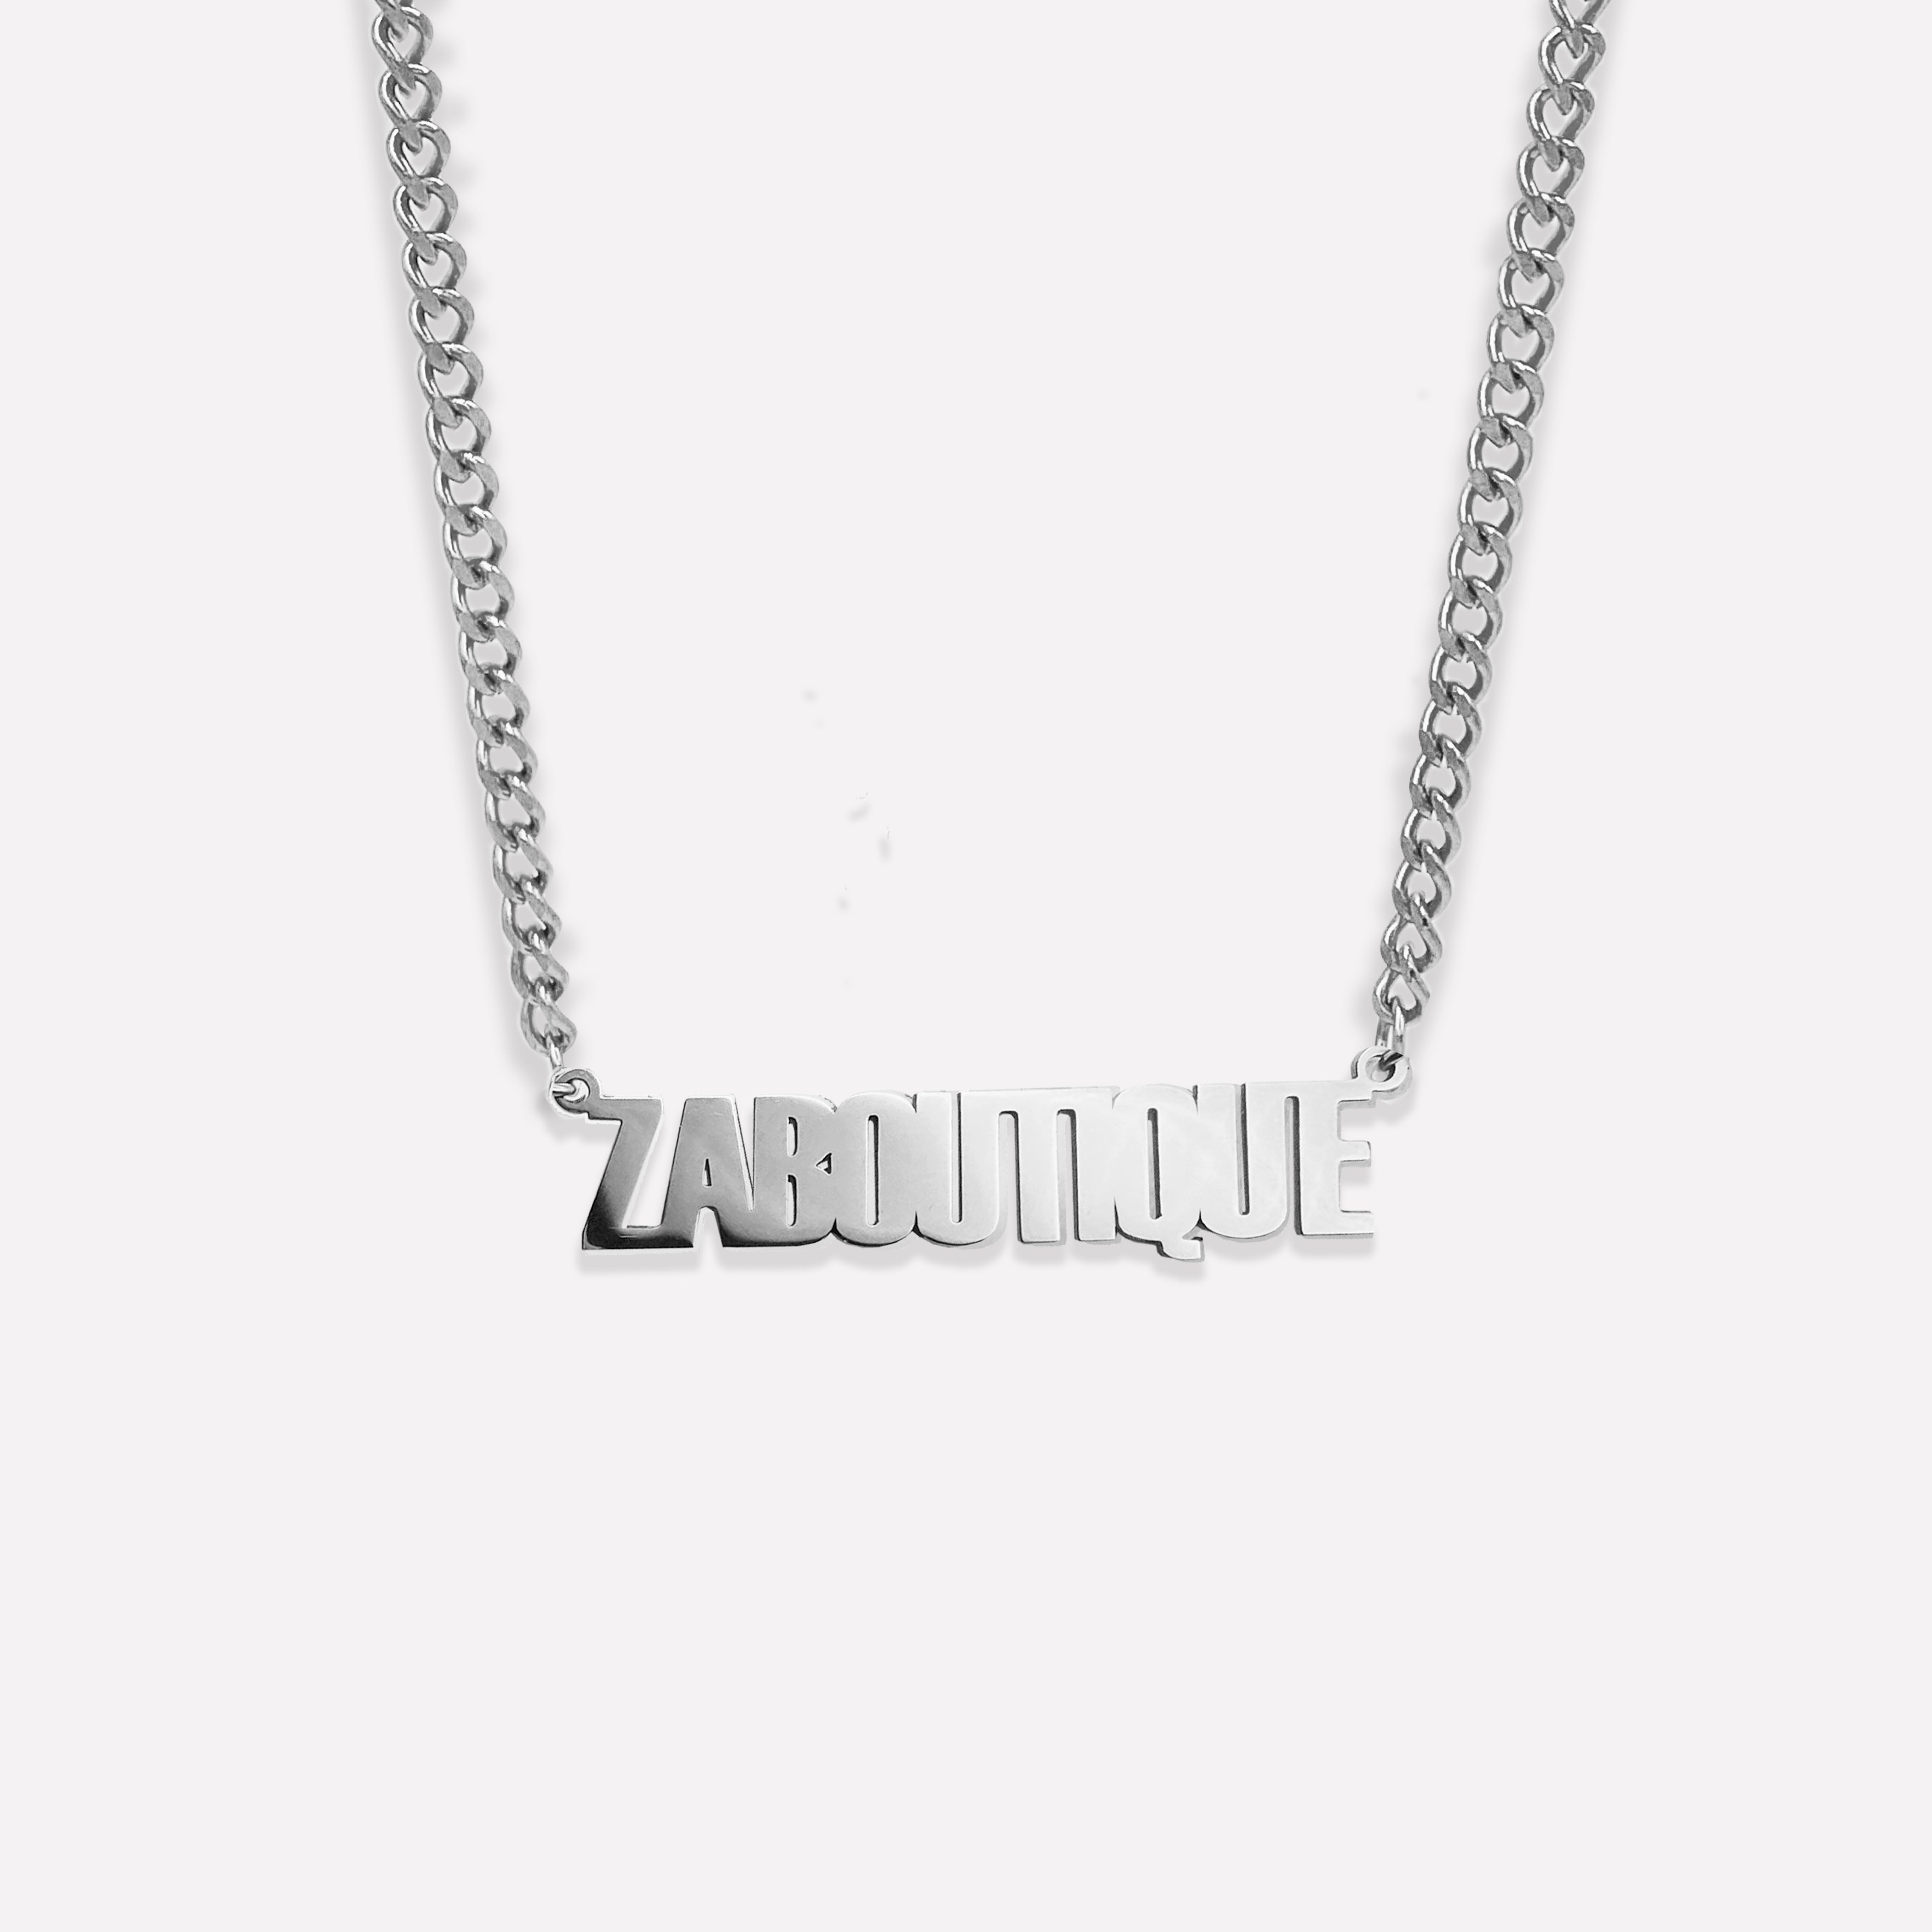 Men's Cuban Link Chain Name Necklace - Stainless Steel Chain